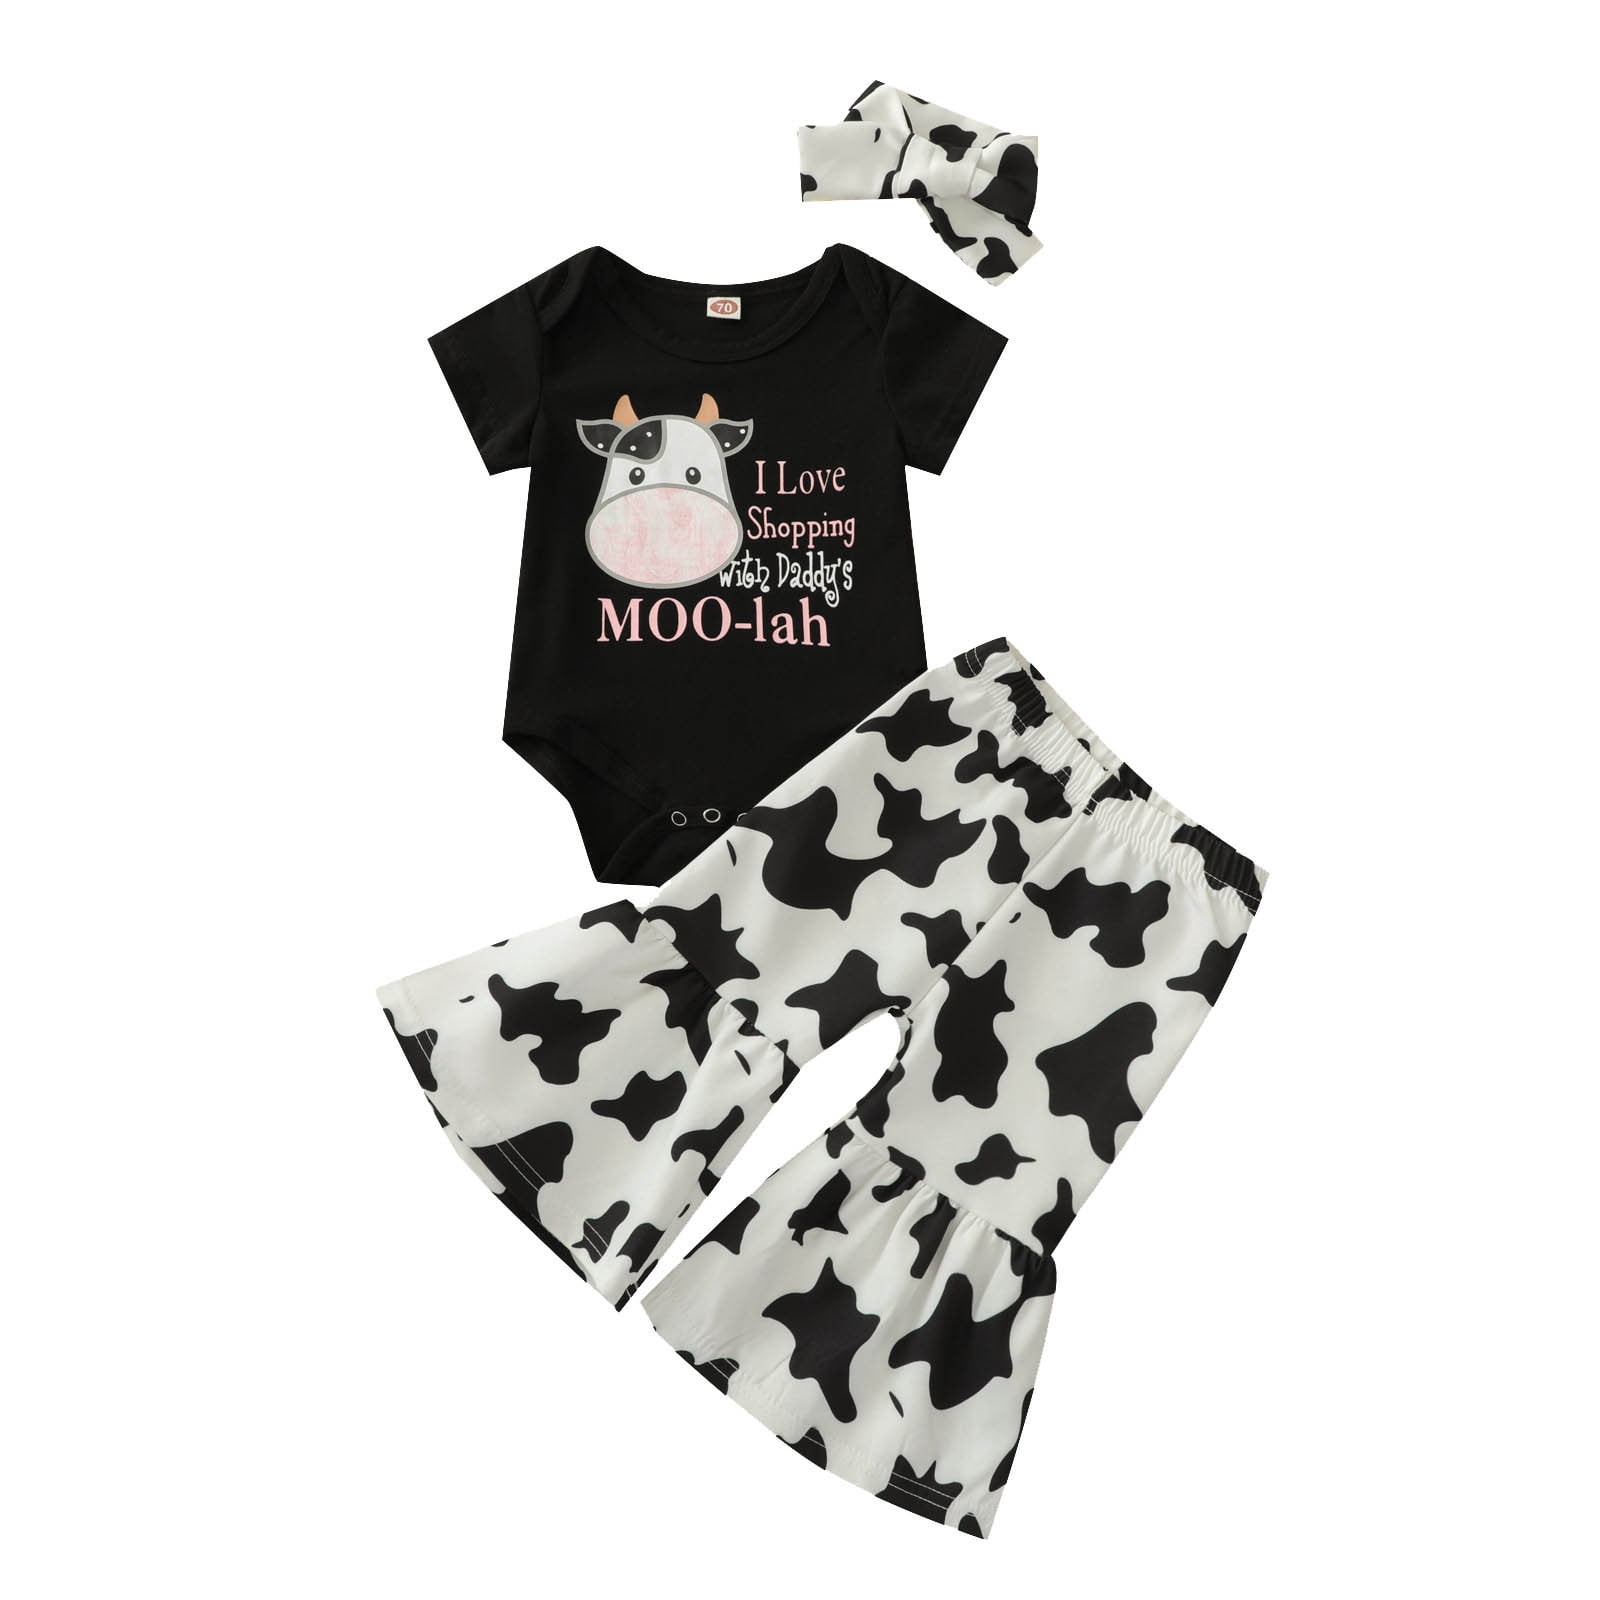 ZHAGHMIN Girls Outfits Size 10-12 Toddler Girls Short Sleeve Cartoon Cow  Printed T Shirt Pullover Tops Bell Bottoms Pants Kids Outfits Set Girl Baby Outfits  for Girls Take Clothes Girls Clothes Size 